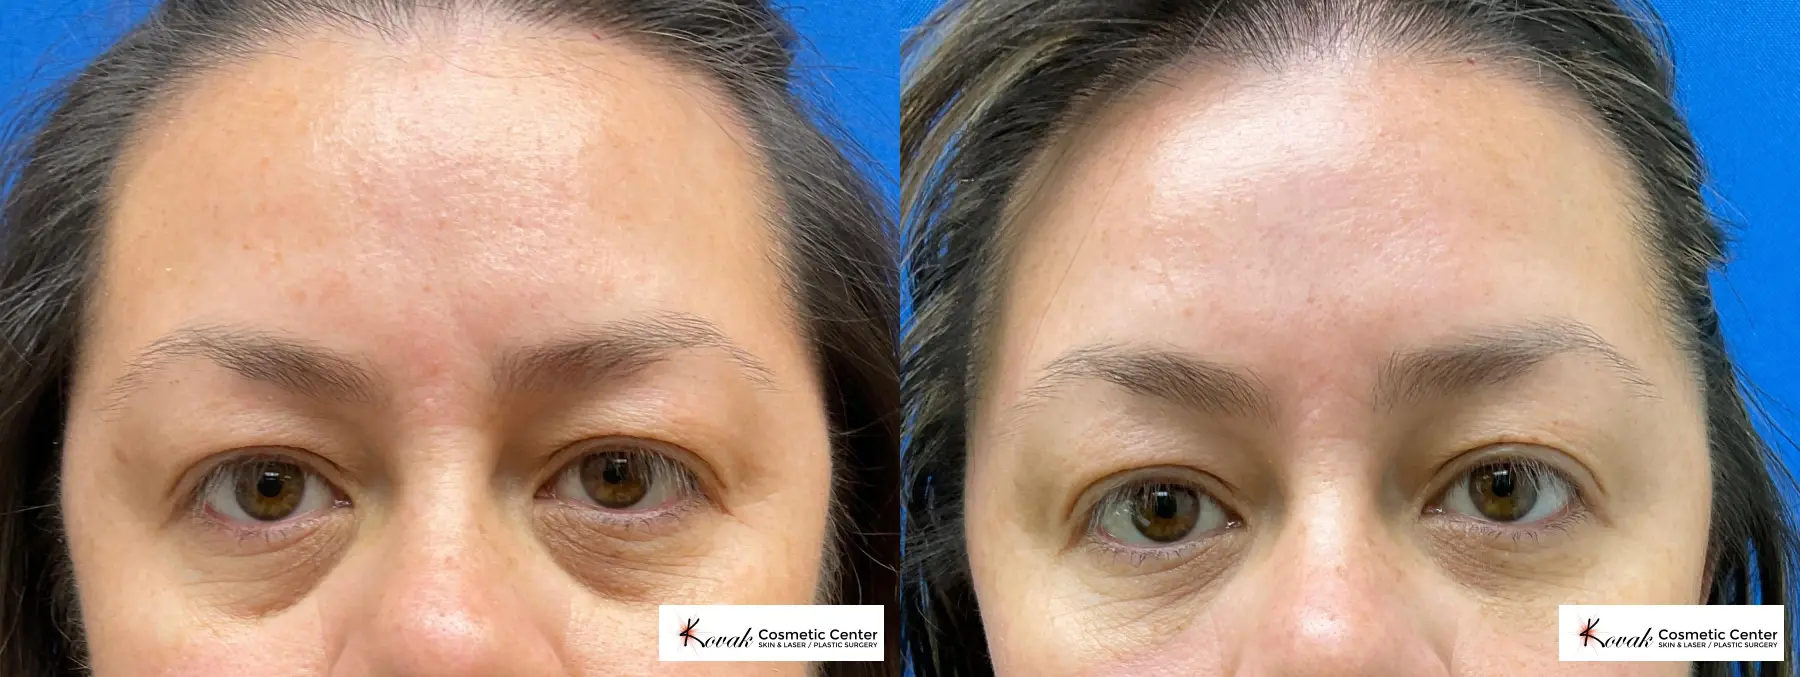 Dark Under Eye Circles using Restylane Silk on a 40 year old female - Before and After 1